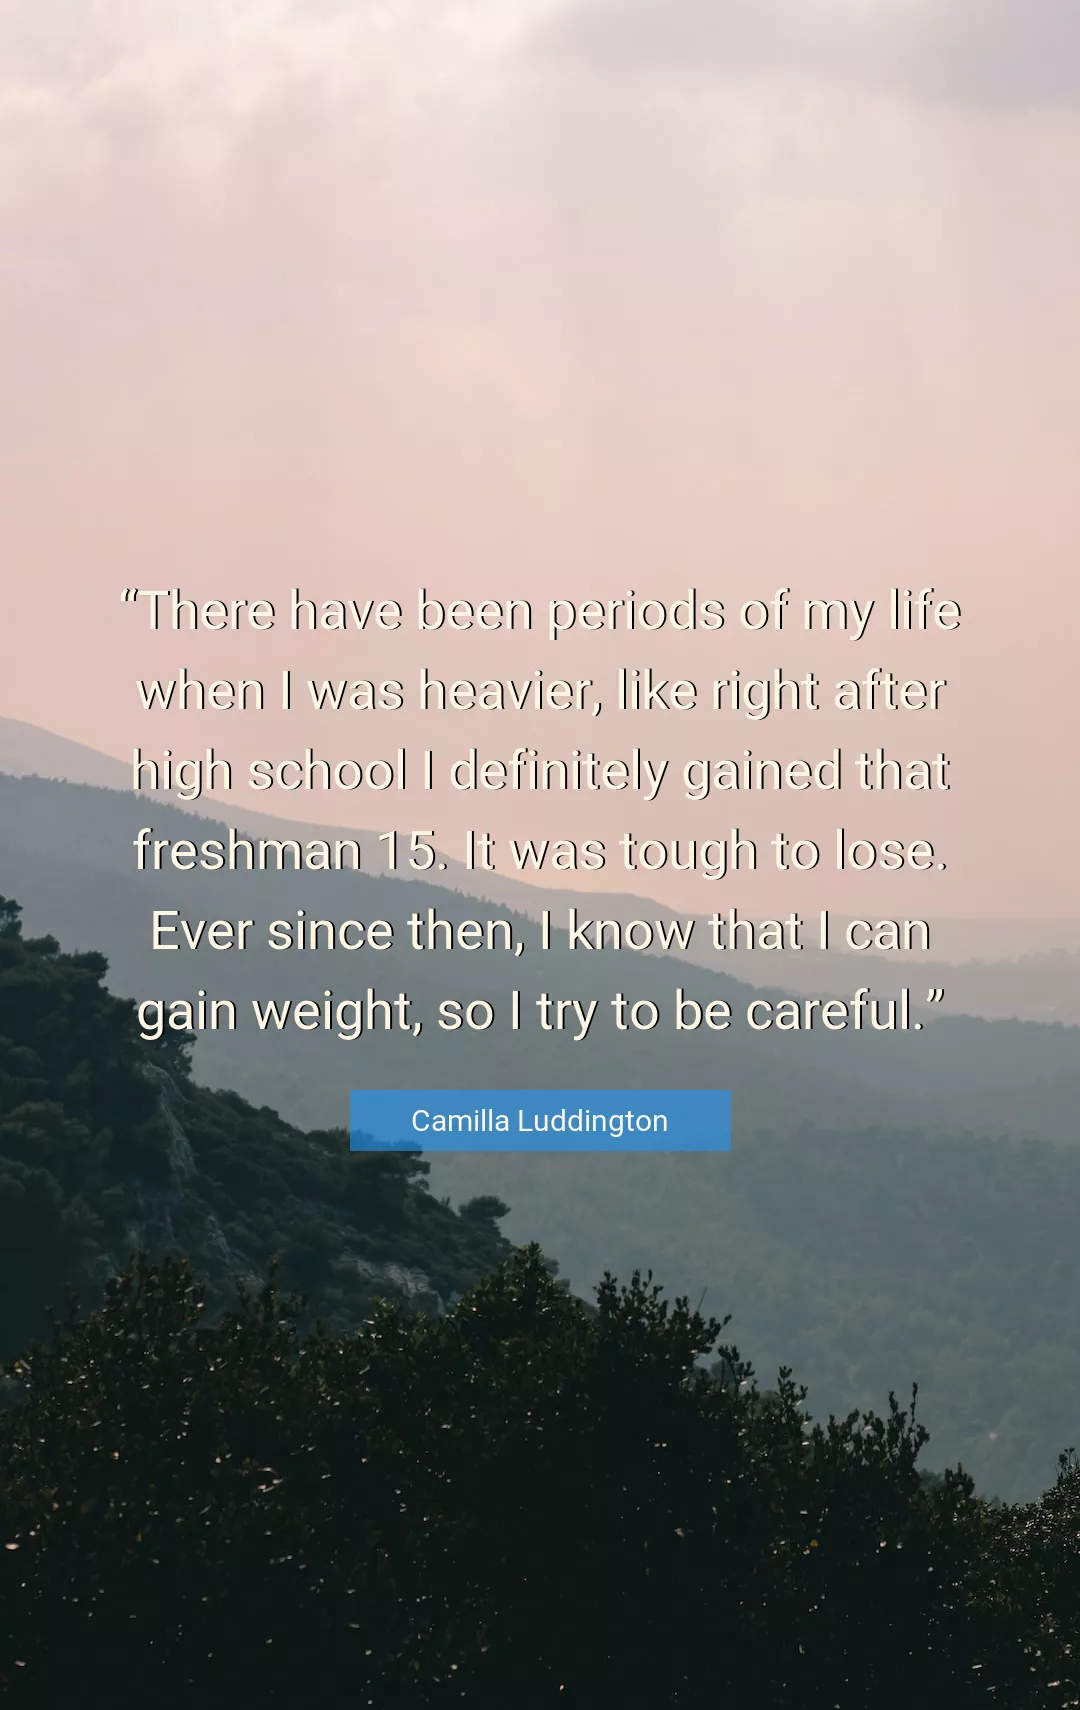 Quote About Life By Camilla Luddington